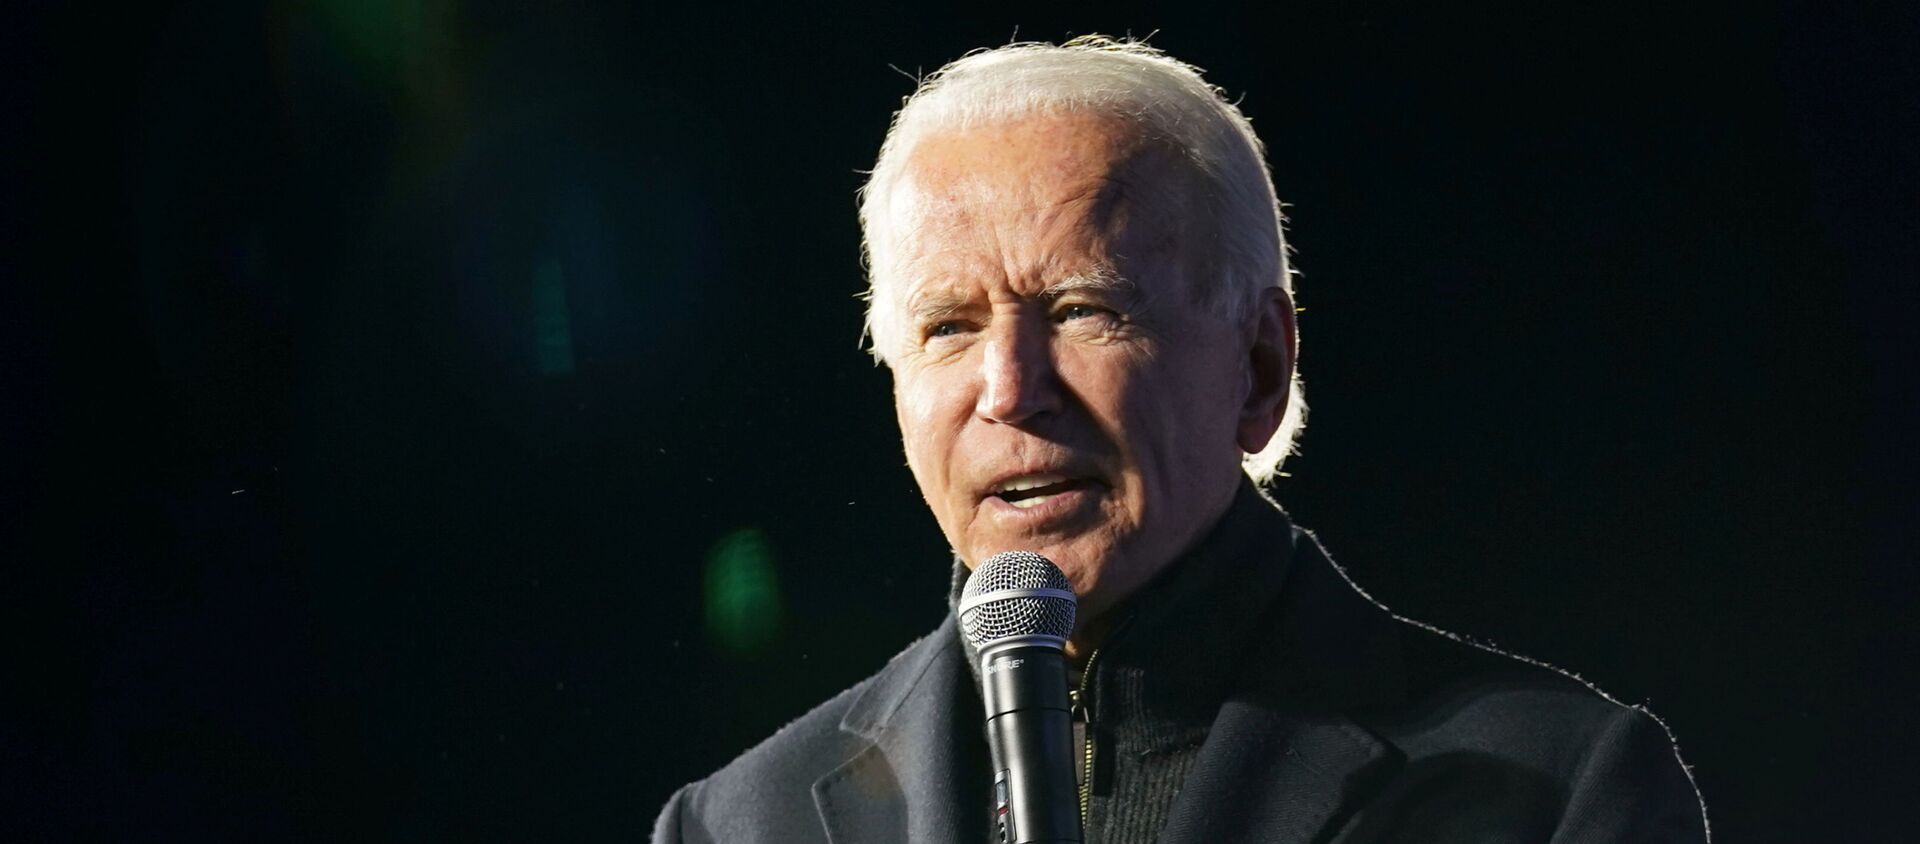 Democratic U.S. presidential nominee and former Vice President Joe Biden speaks during a drive-in campaign rally at Lexington Technology Park in Pittsburgh, Pennsylvania, U.S., November 2, 2020 - 俄罗斯卫星通讯社, 1920, 04.11.2020